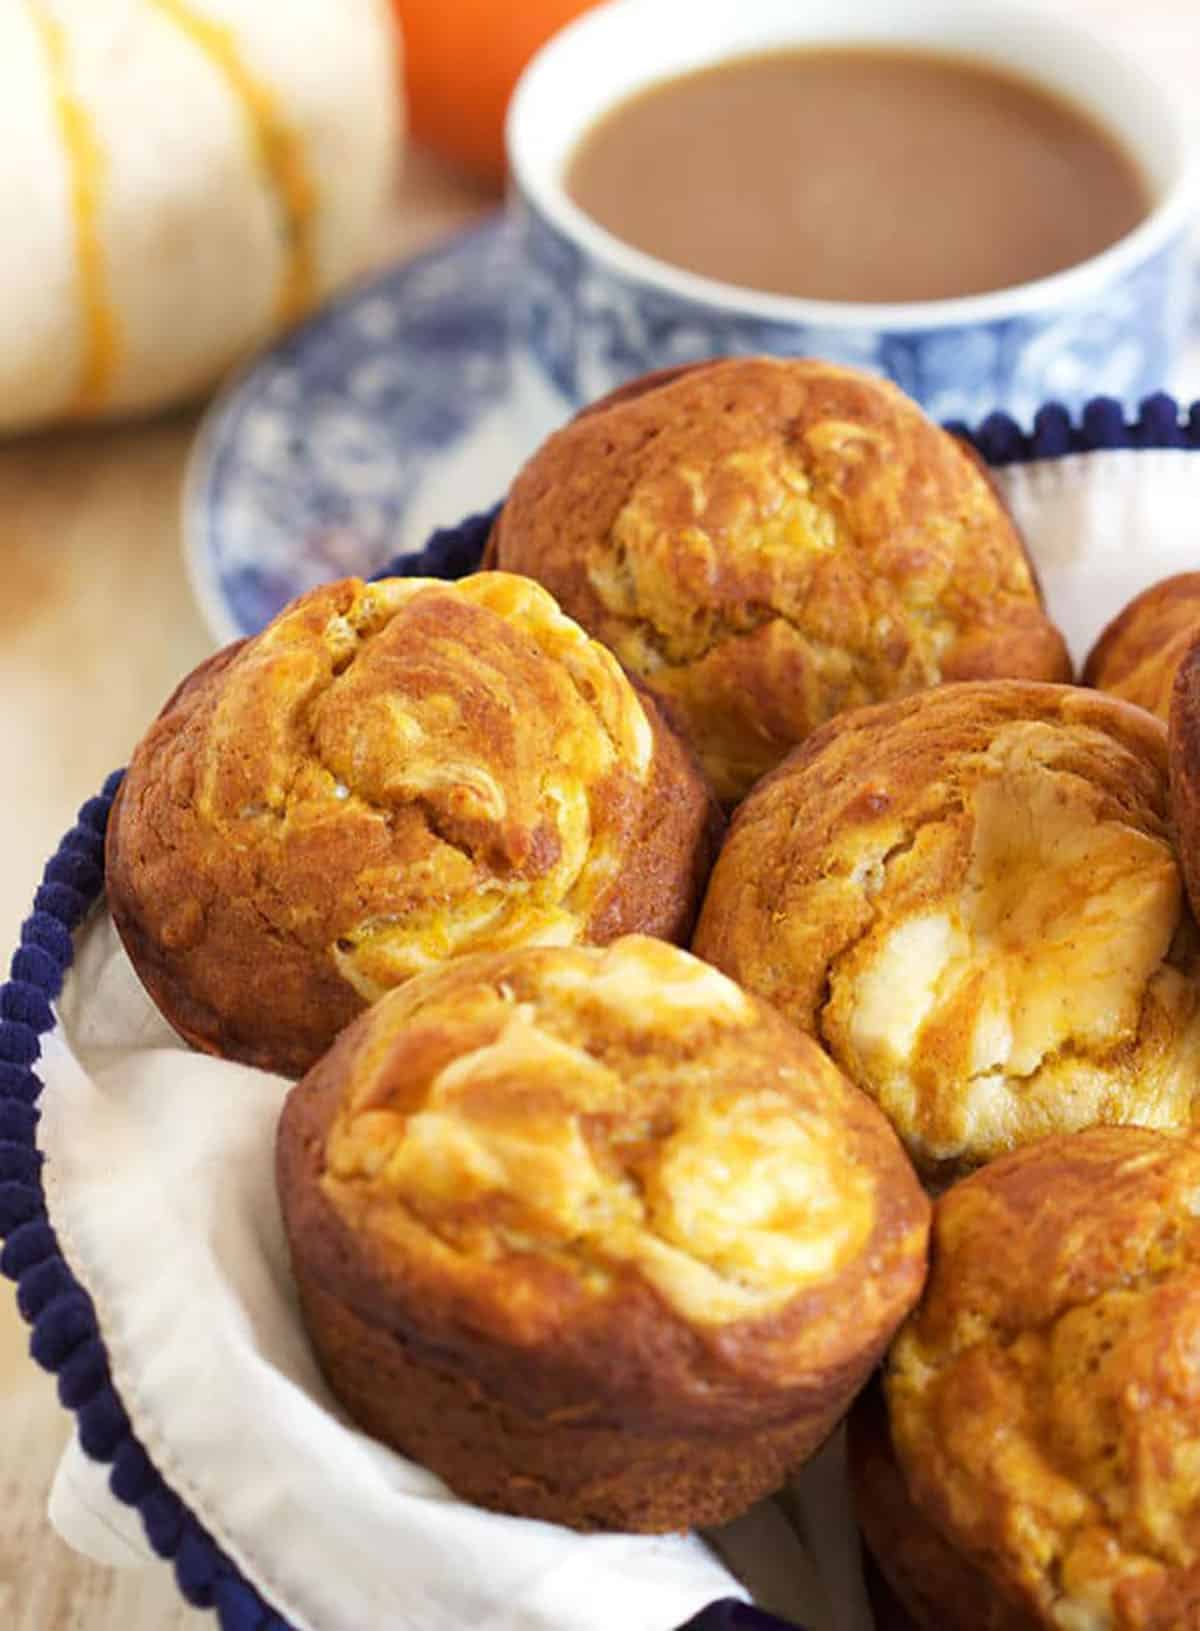 Pumpkin Cream Cheese Swirl Muffins in a basket with a white napkin and a cup of coffee in the background.